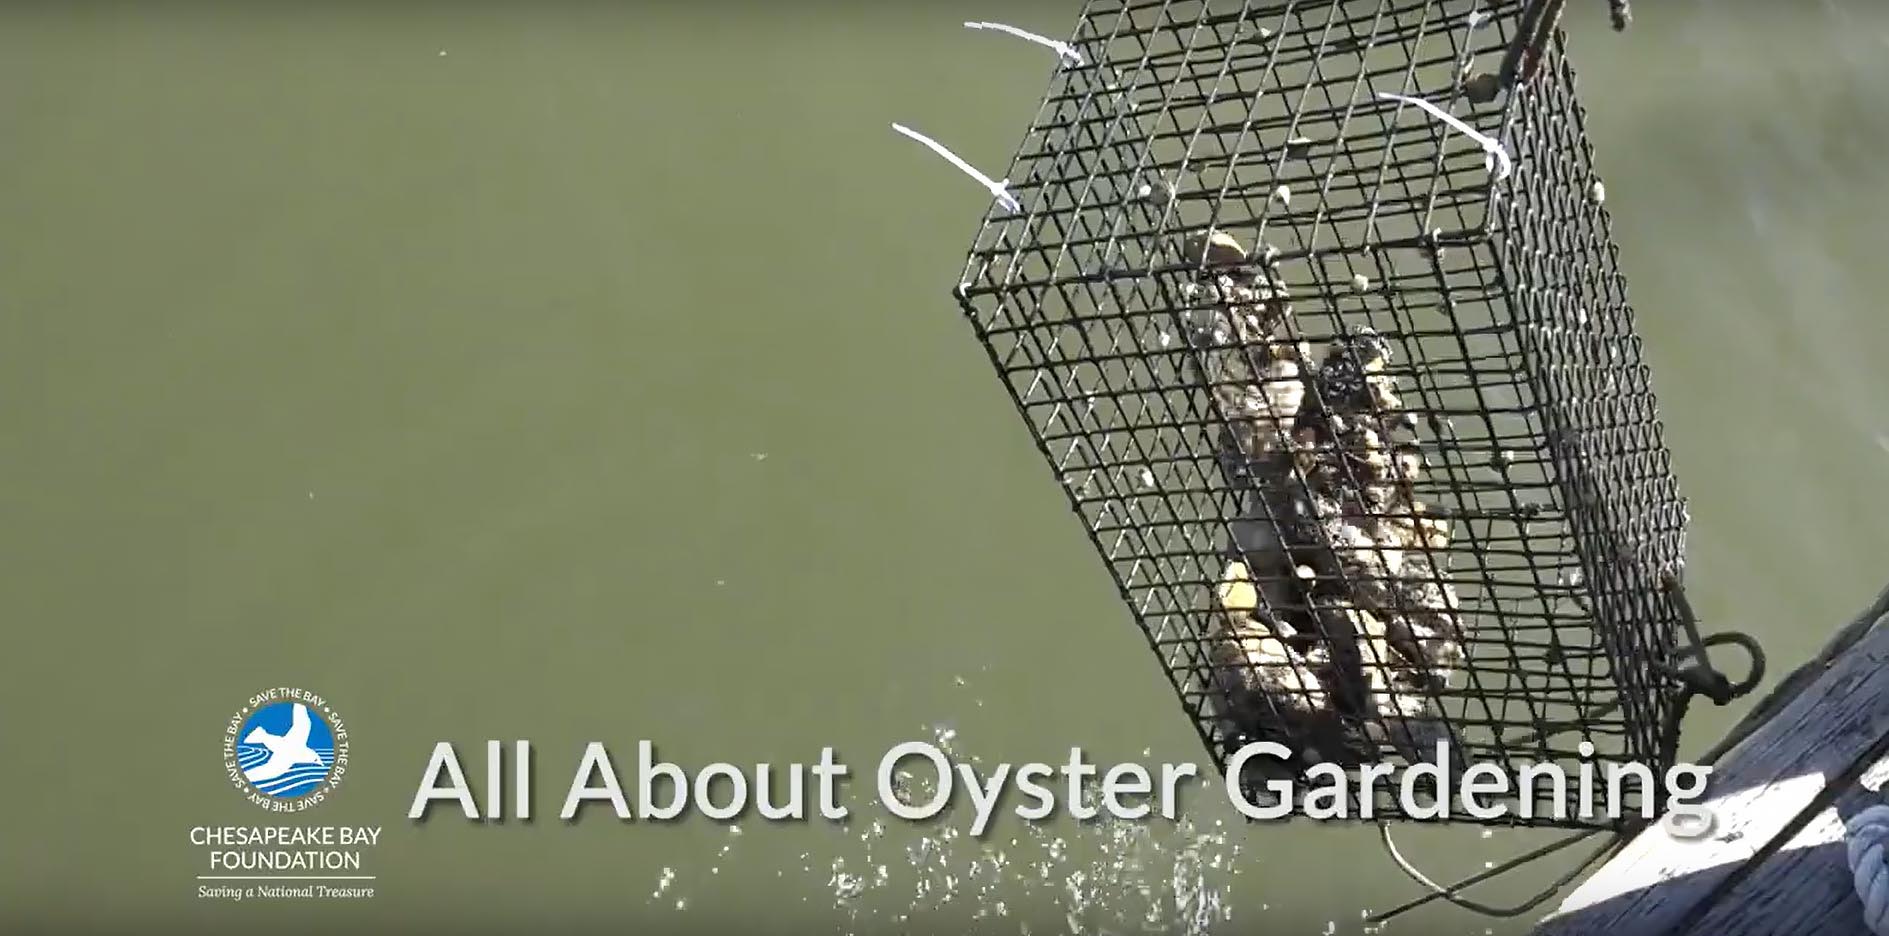 all about oyster gardening 1171x593